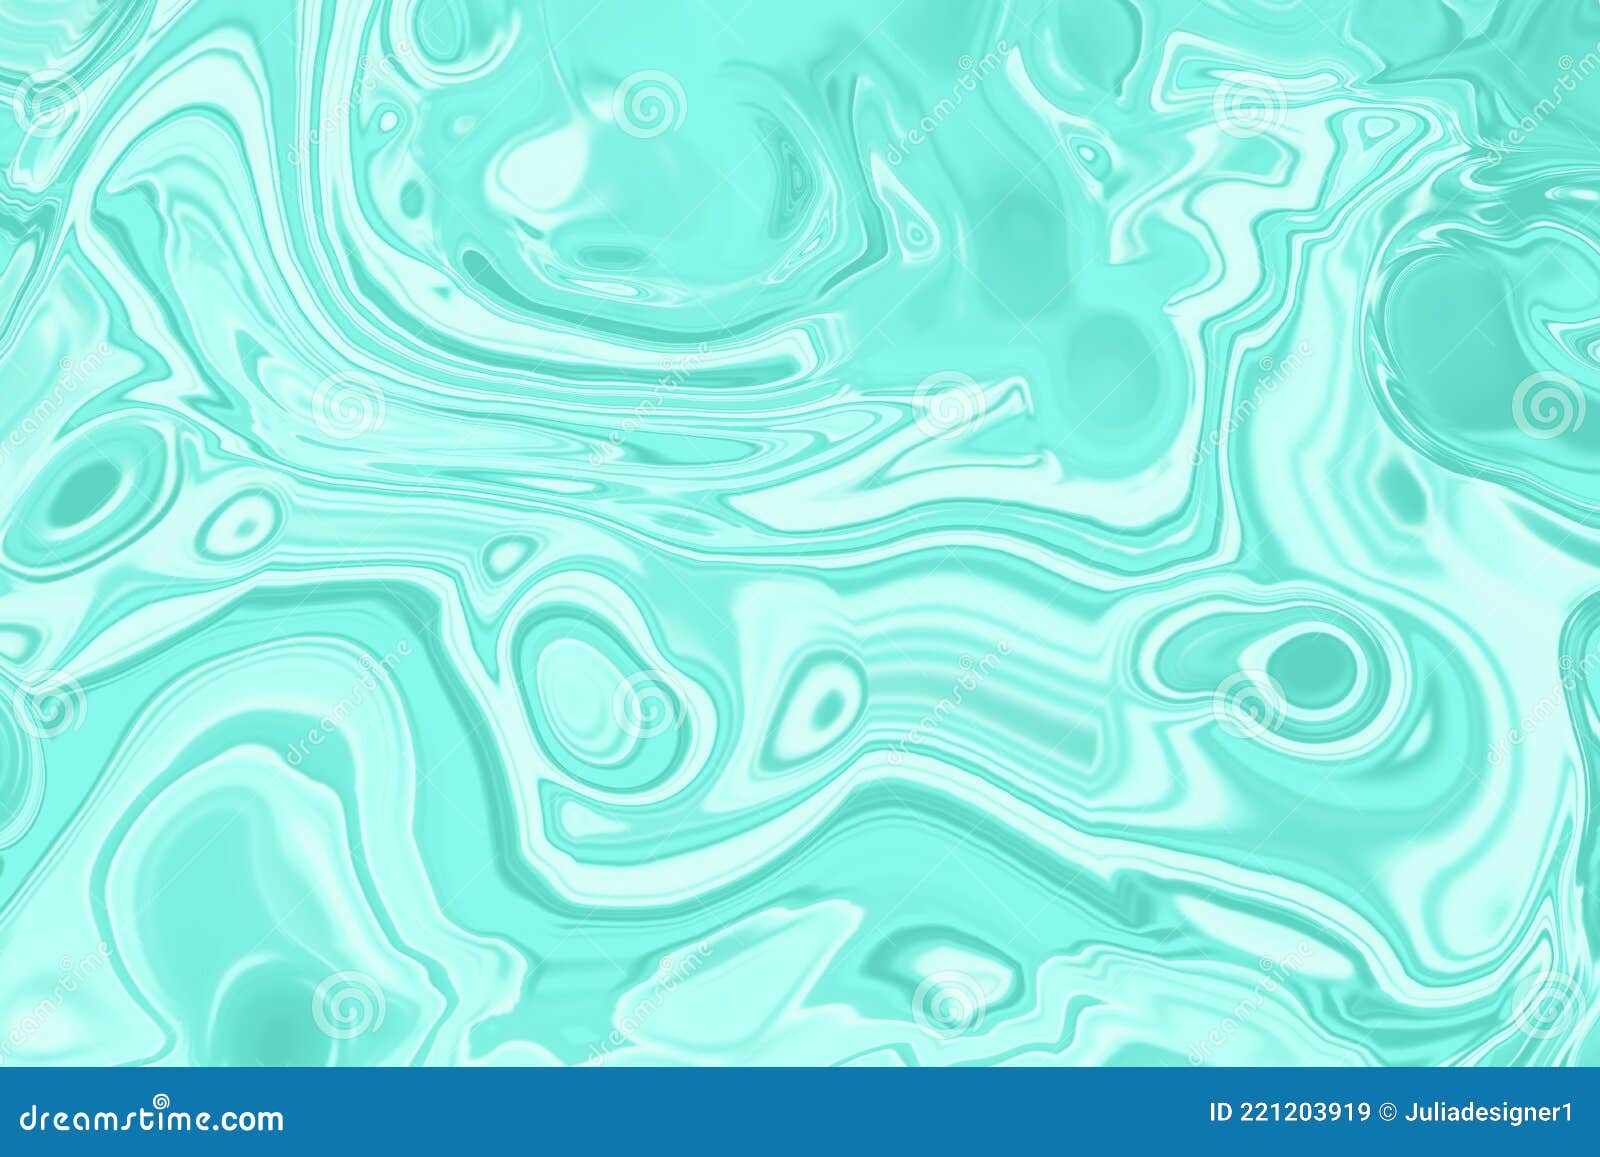 Abstract Turquoise Marble Background. Pastel Sunbaked Mint Pattern. Trendy  Blue, Green Digital Fluid Art Wallpaper Stock Image - Image of moodboard,  luxury: 221203919